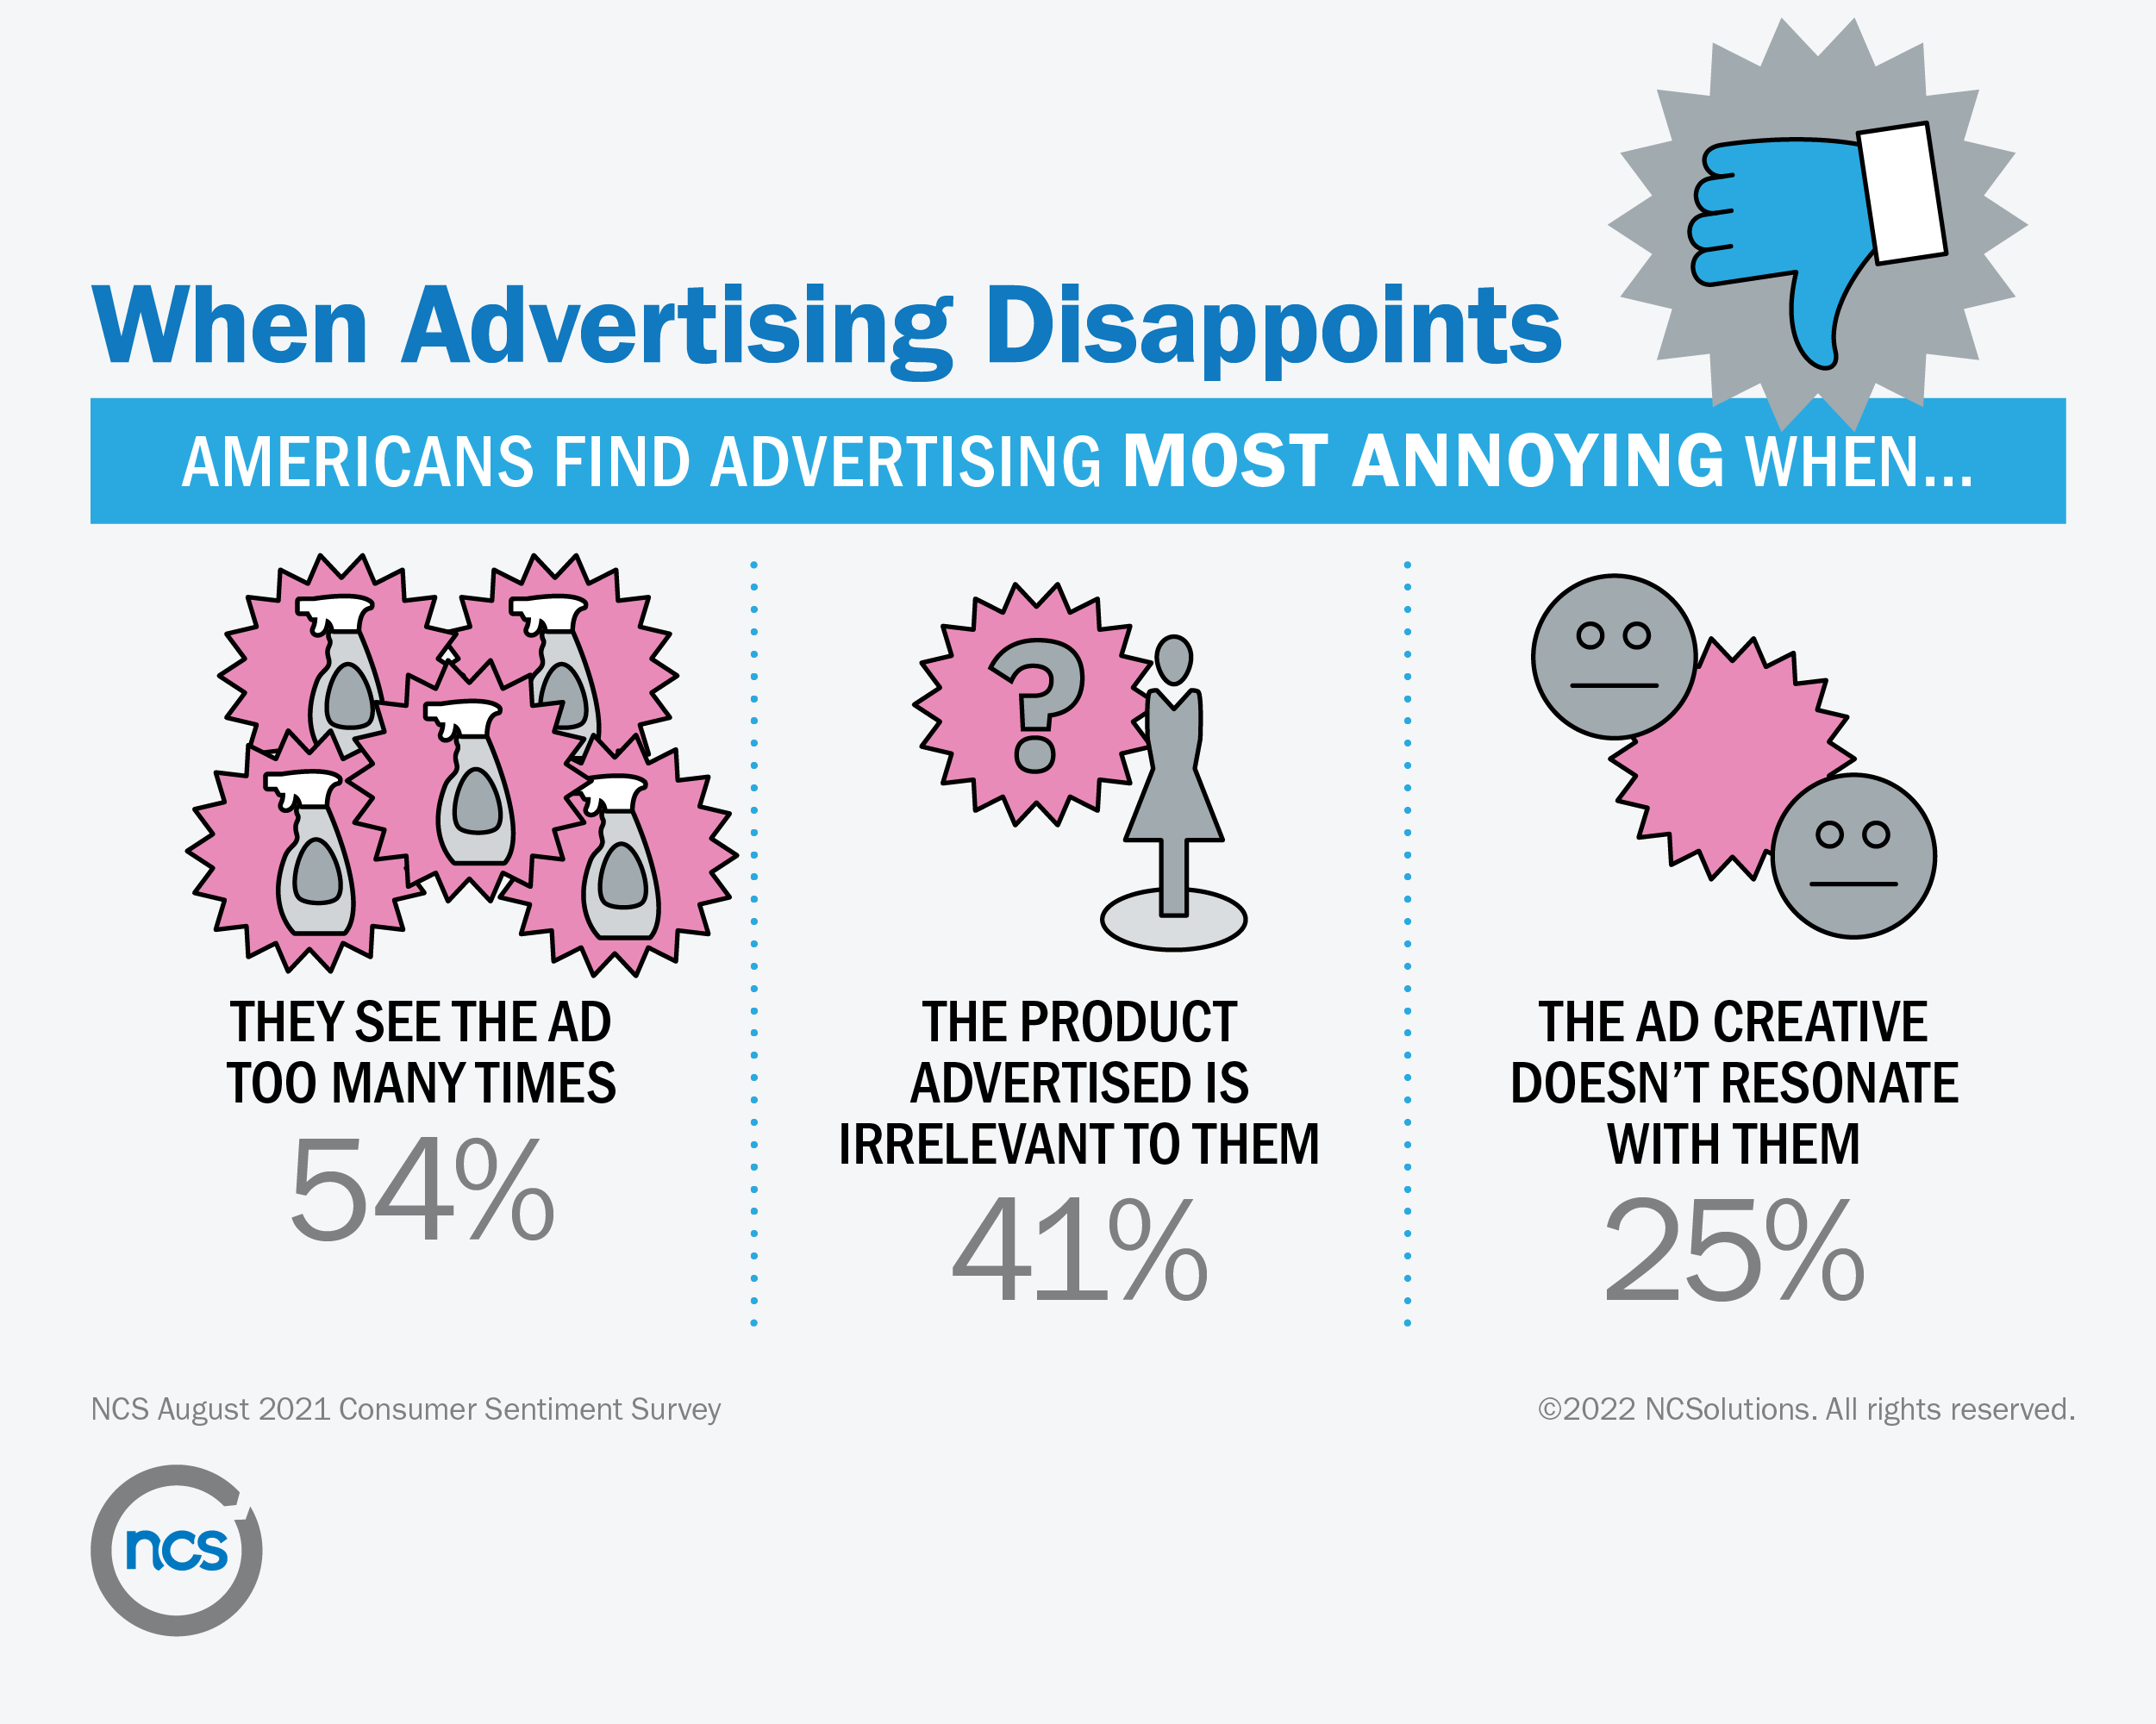 NCSolutions consumer survey shows 54% of Americans find advertising most annoying when they see the same ad too many times.